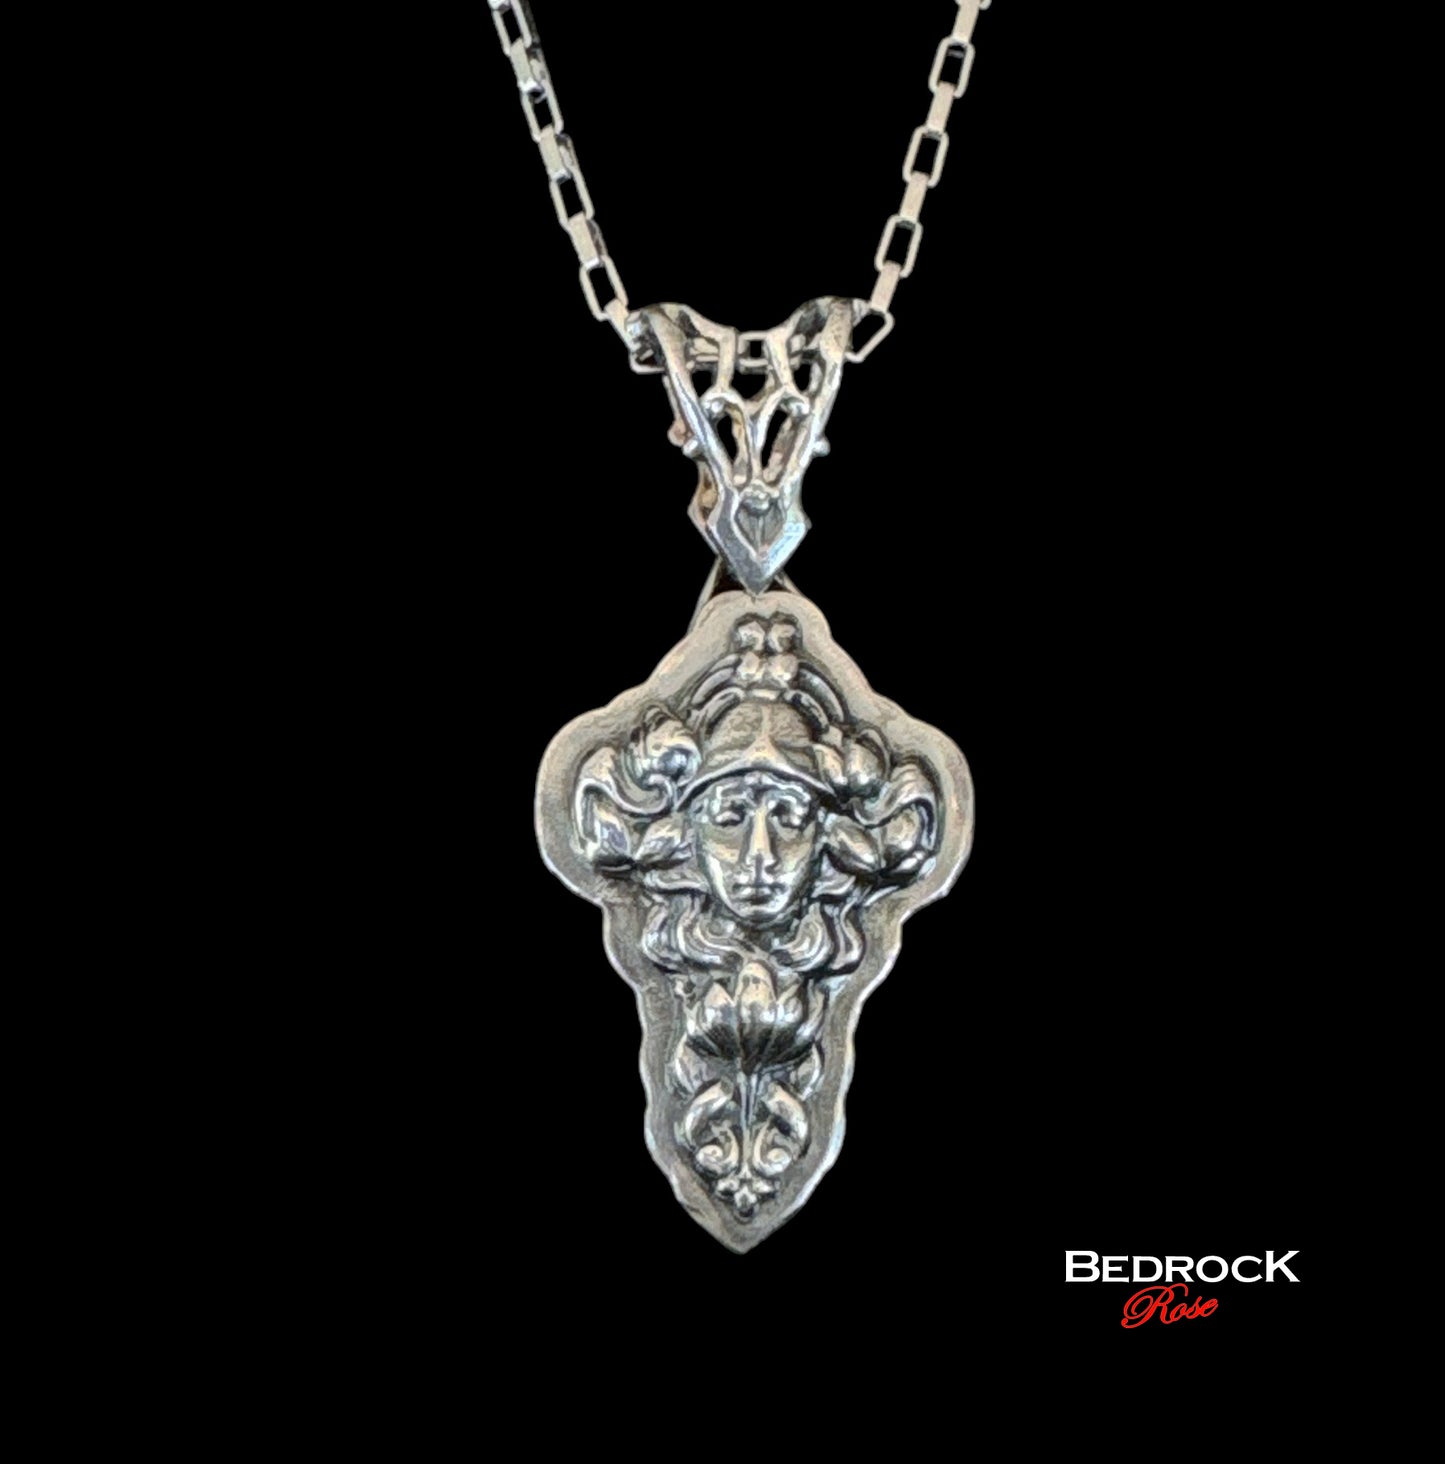 Sterling Silver Art Nouveau Lady Pendant, Hand-pierced bail, Heirloom quality Jewelry, Statement Necklace, Vintage Design, Die-Struck Jewelry, Potter Die